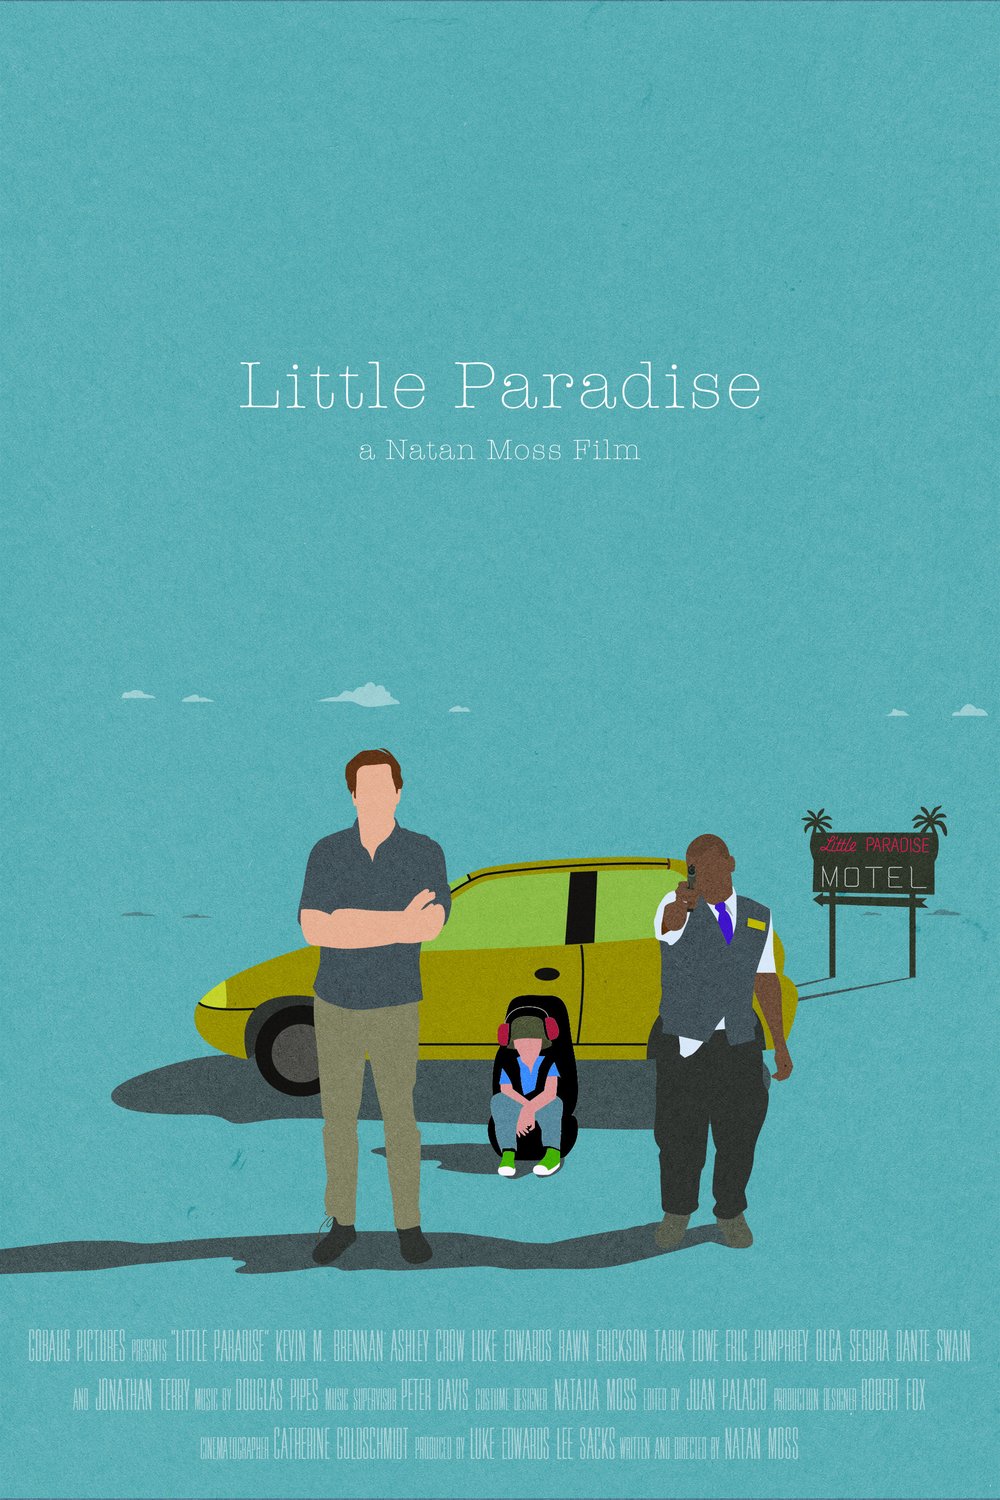 Poster of the movie Little Paradise